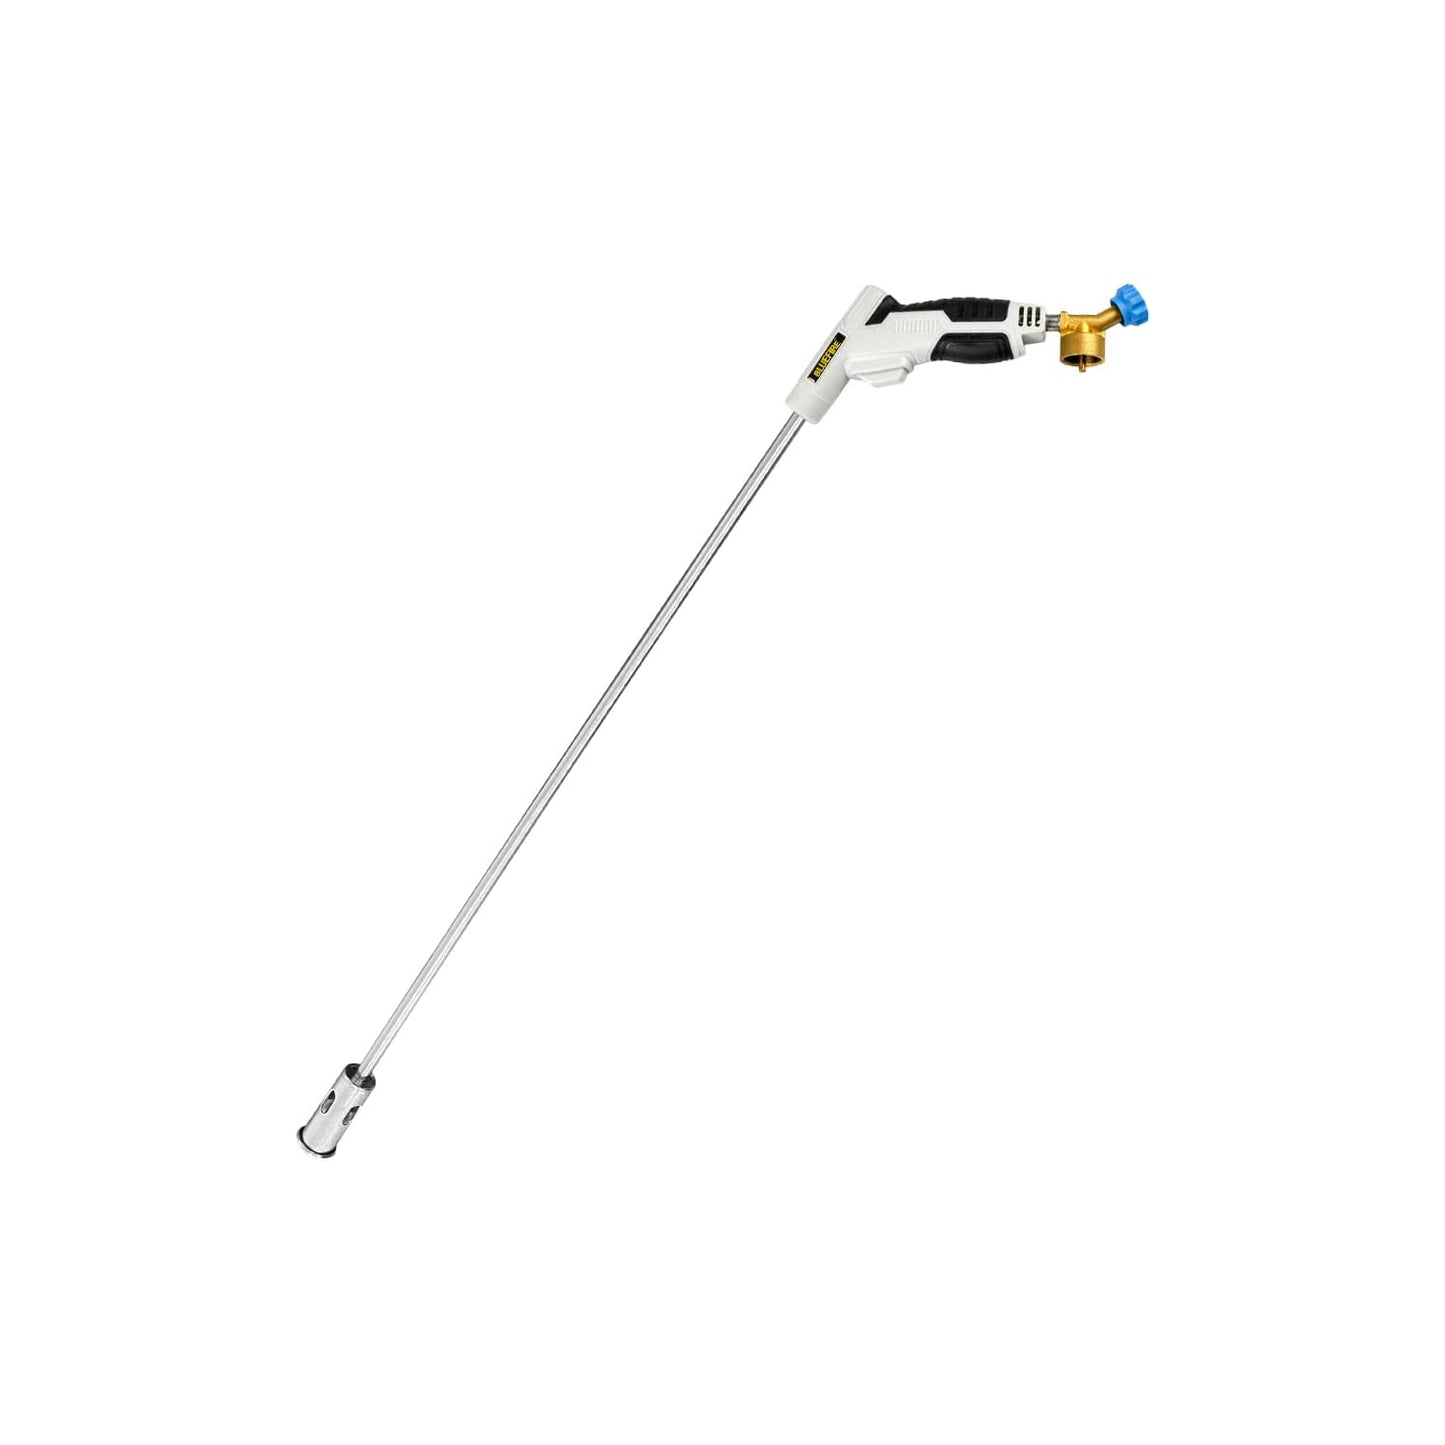 ‎MRAS-8360 32" long Propane Torch Weed Burner Self Igniting Cord Free Flamethrower Weed Torch